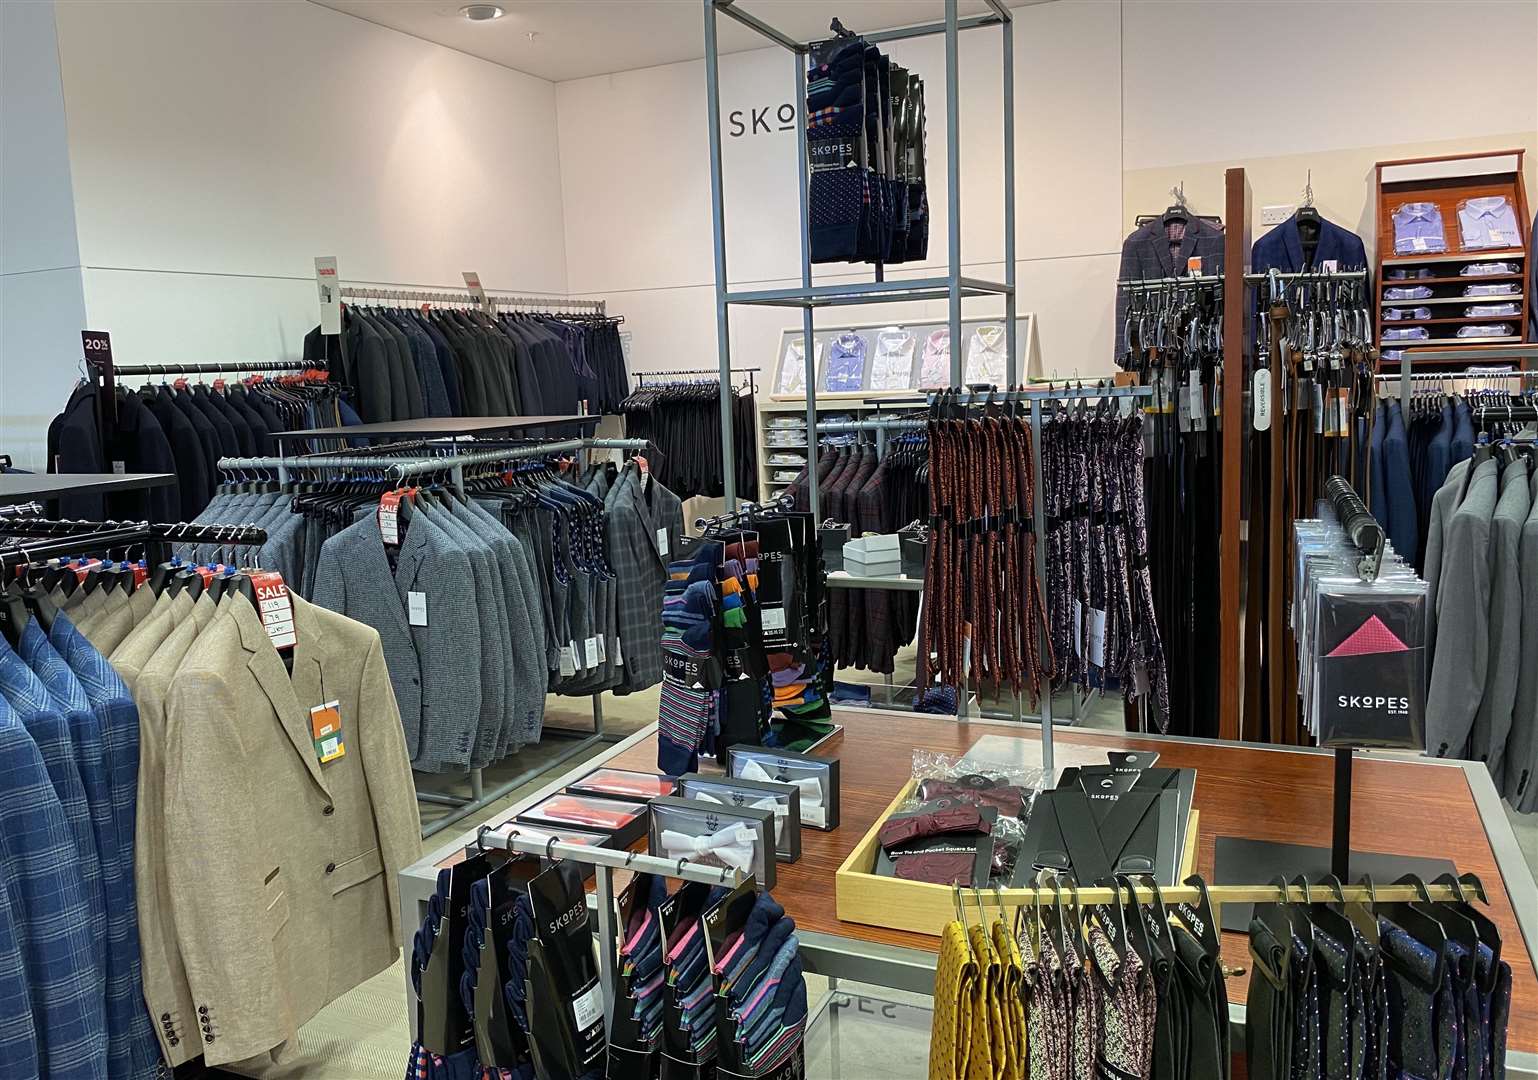 Skopes menswear, at House of Fraser in Maidstone